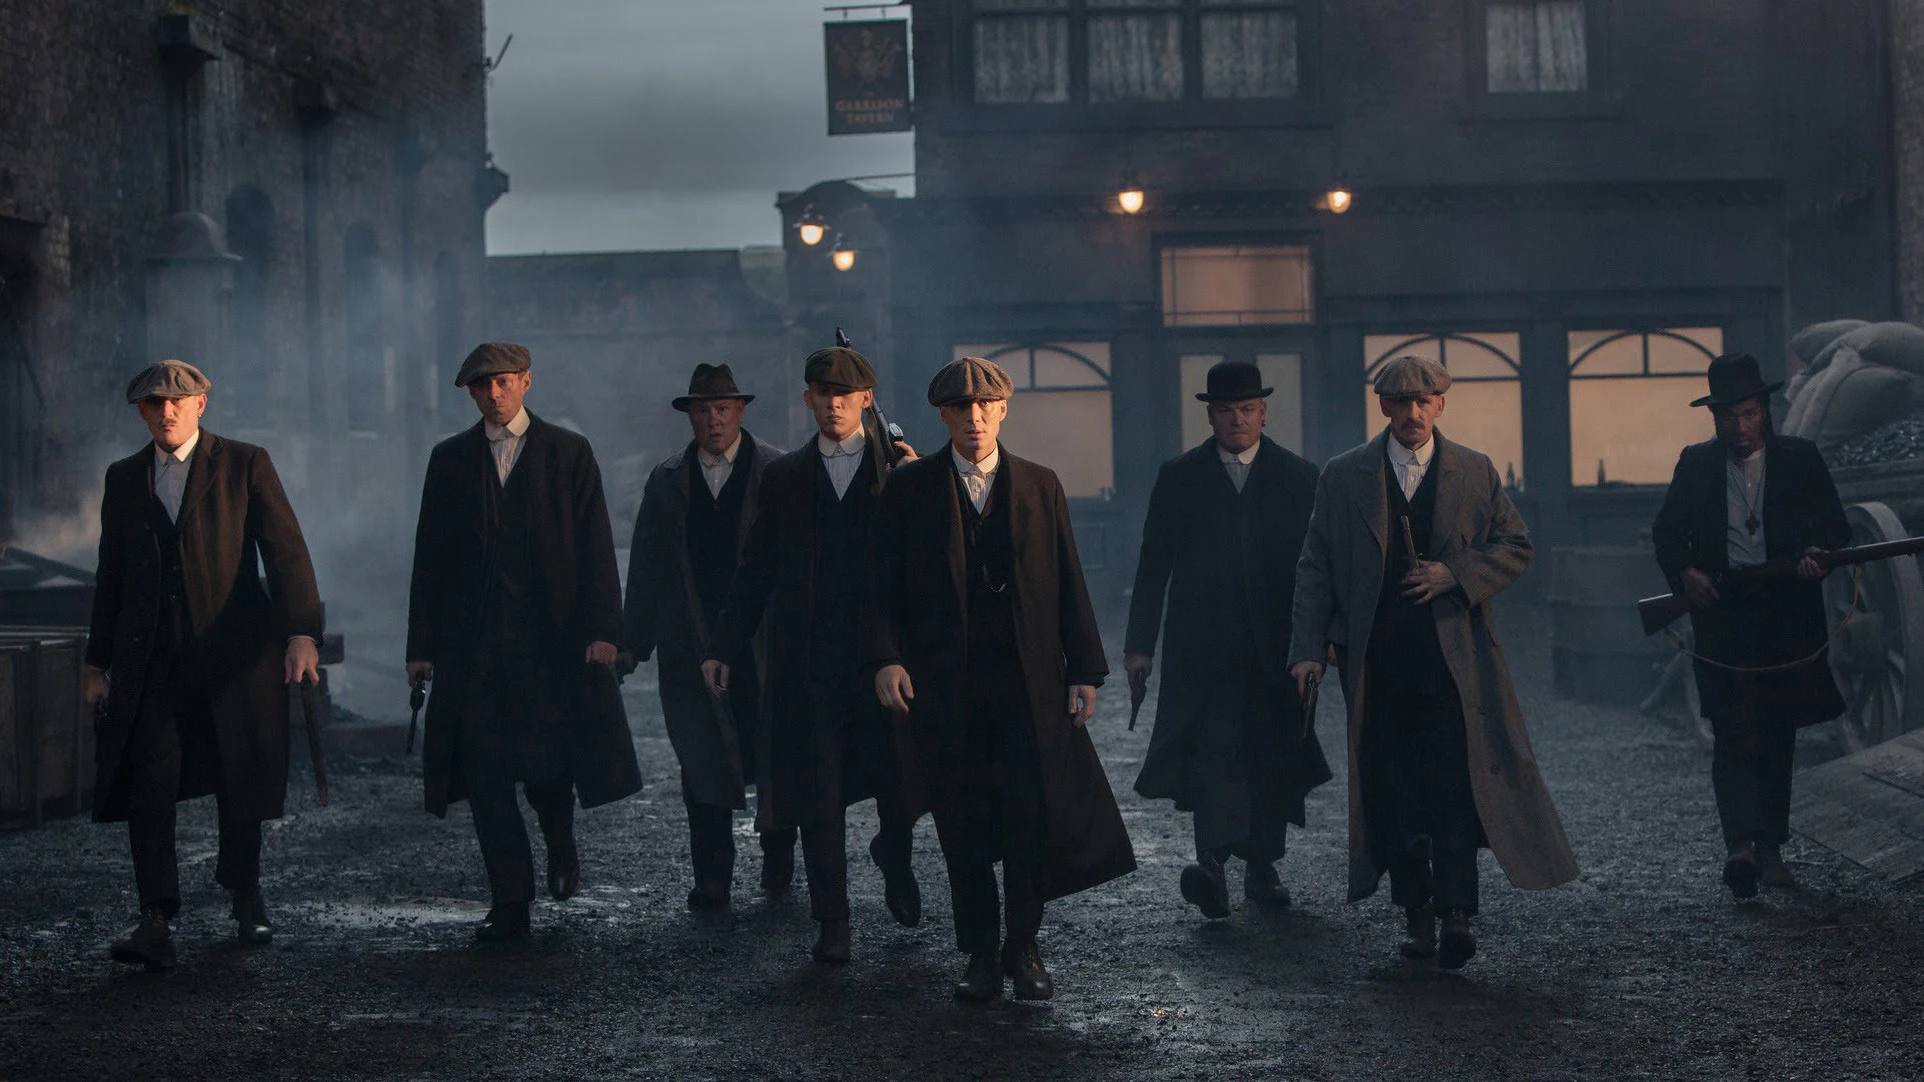 "Peaky Blinders: The Grand Finale and Beyond - What's Next for the Shelby Clan?"